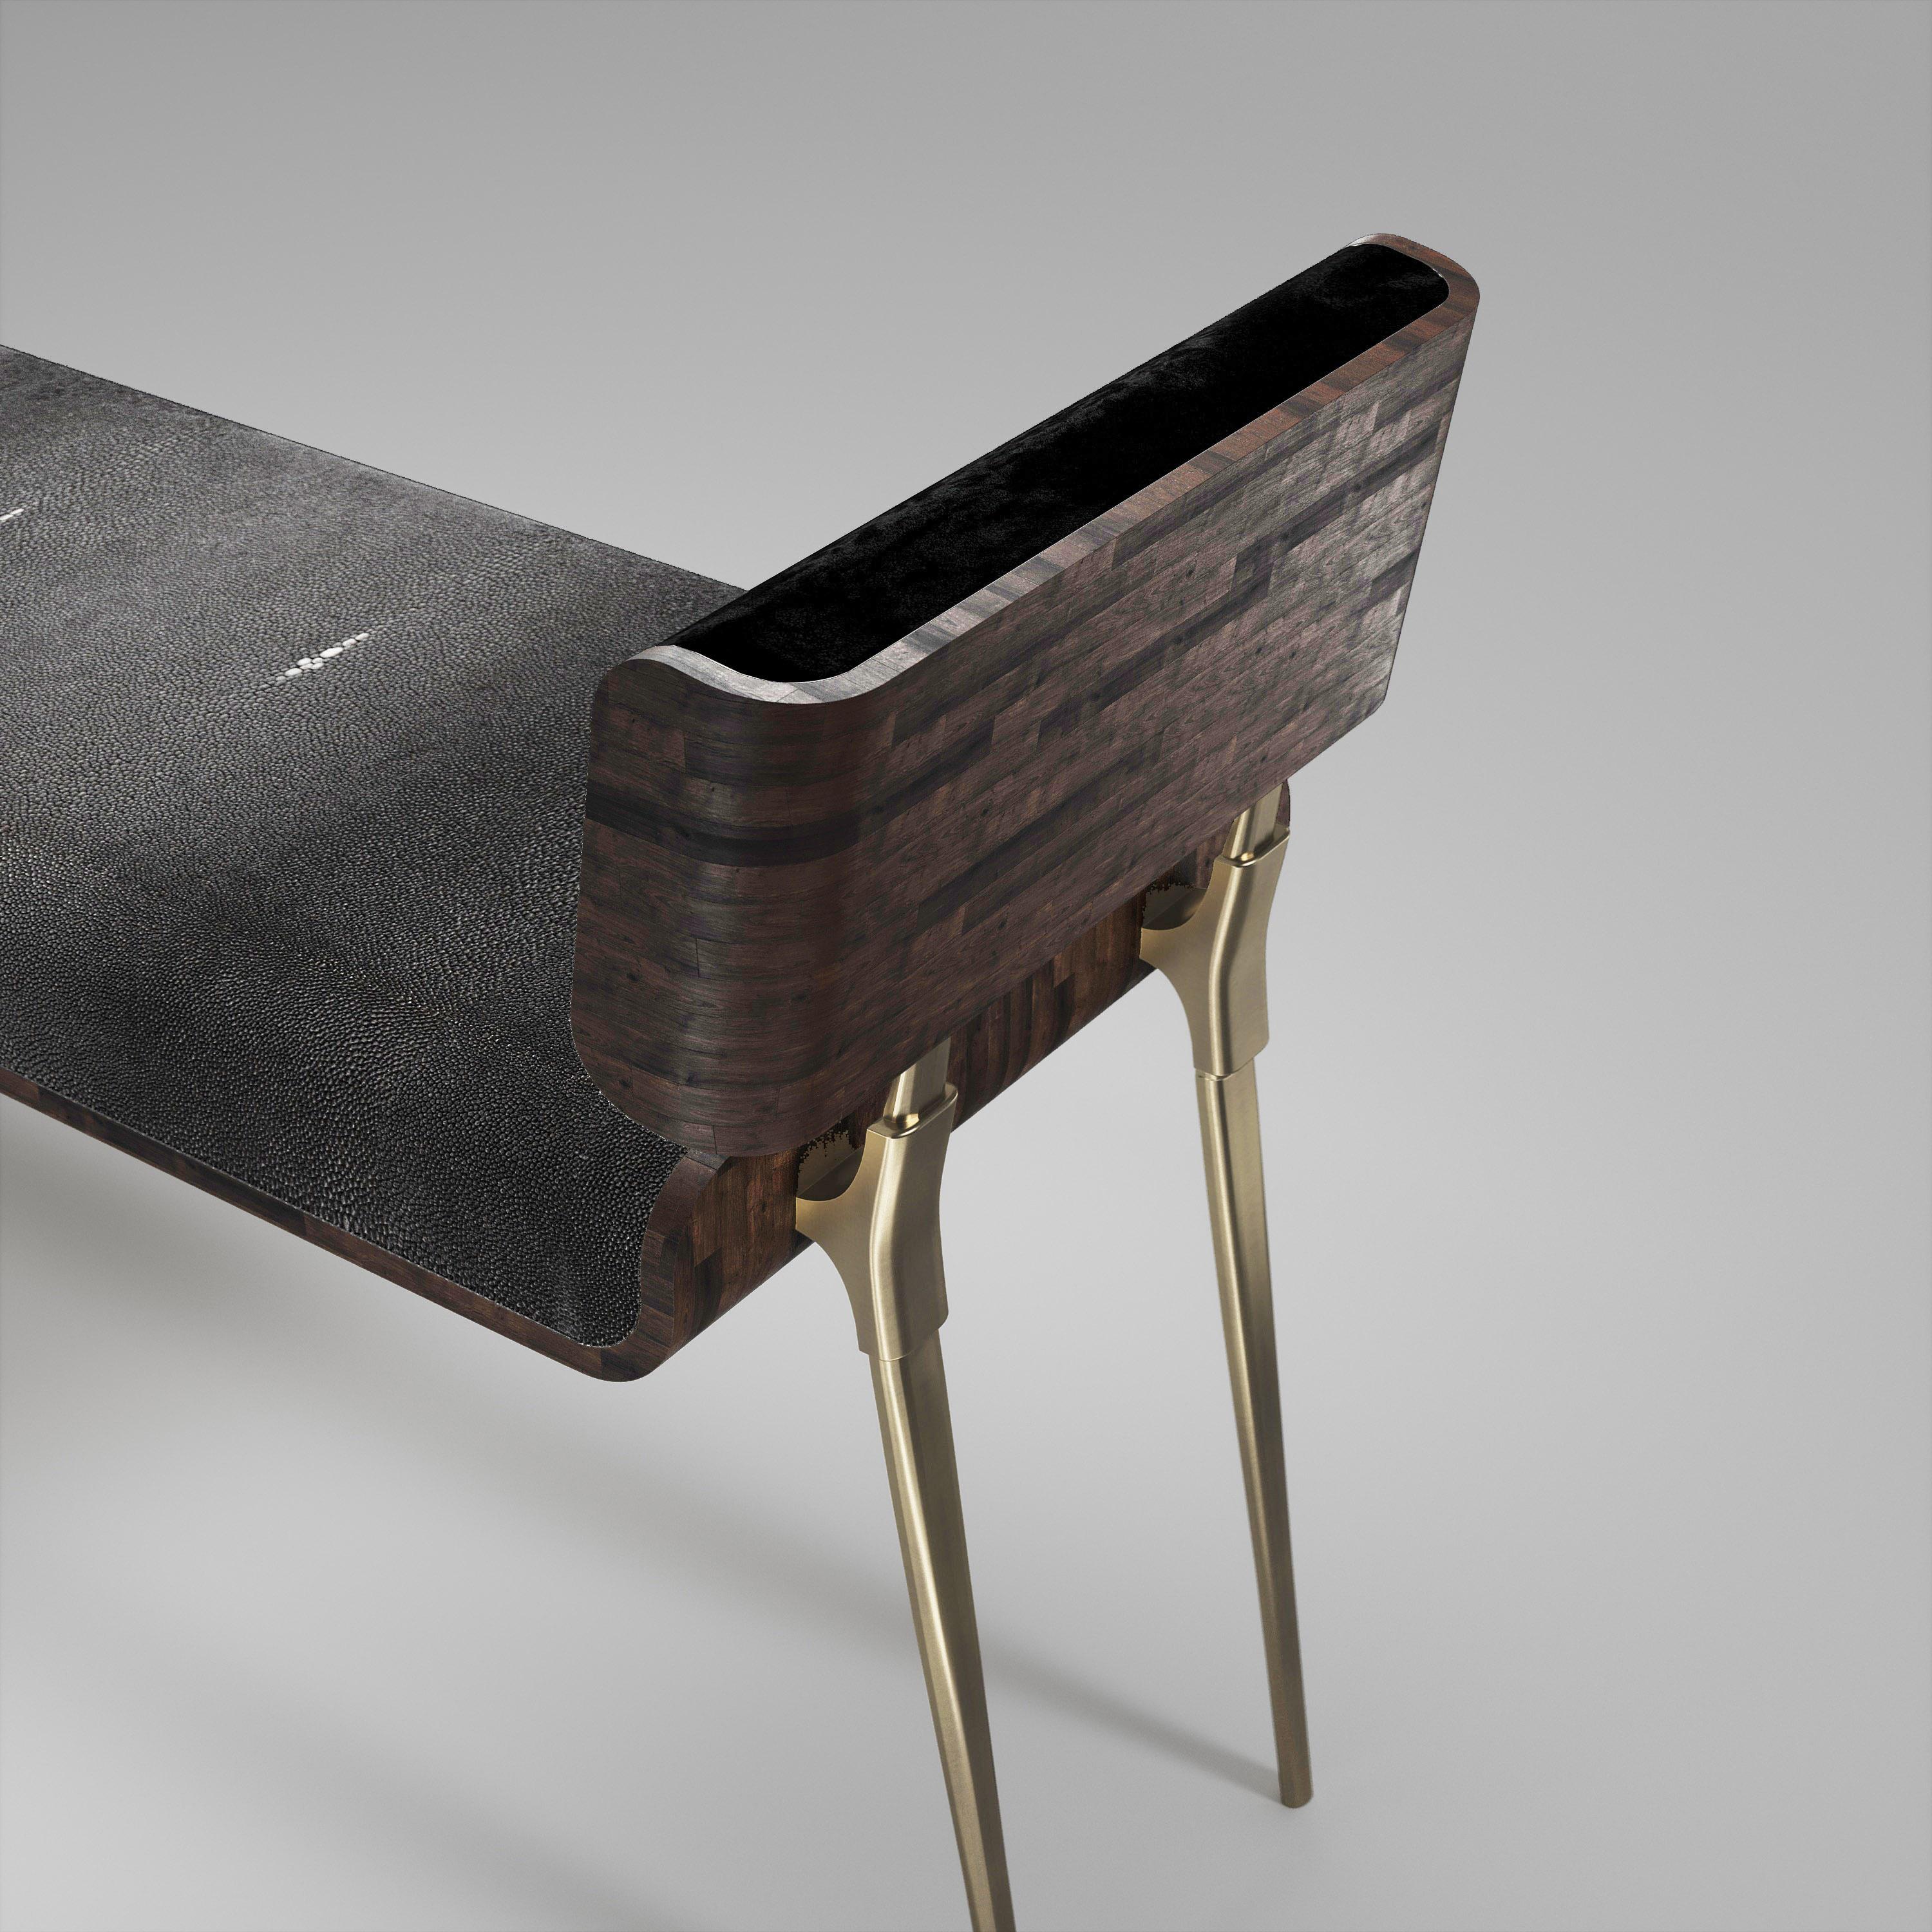 Inspired by the original Dandy Bench by Kifu Paris (see images at end of slide), the Dandy II Entrance Bench is the ultimate luxury seating. The seating area is inlaid in coal black shagreen the frame and sides of the bench in Palmwood and the legs